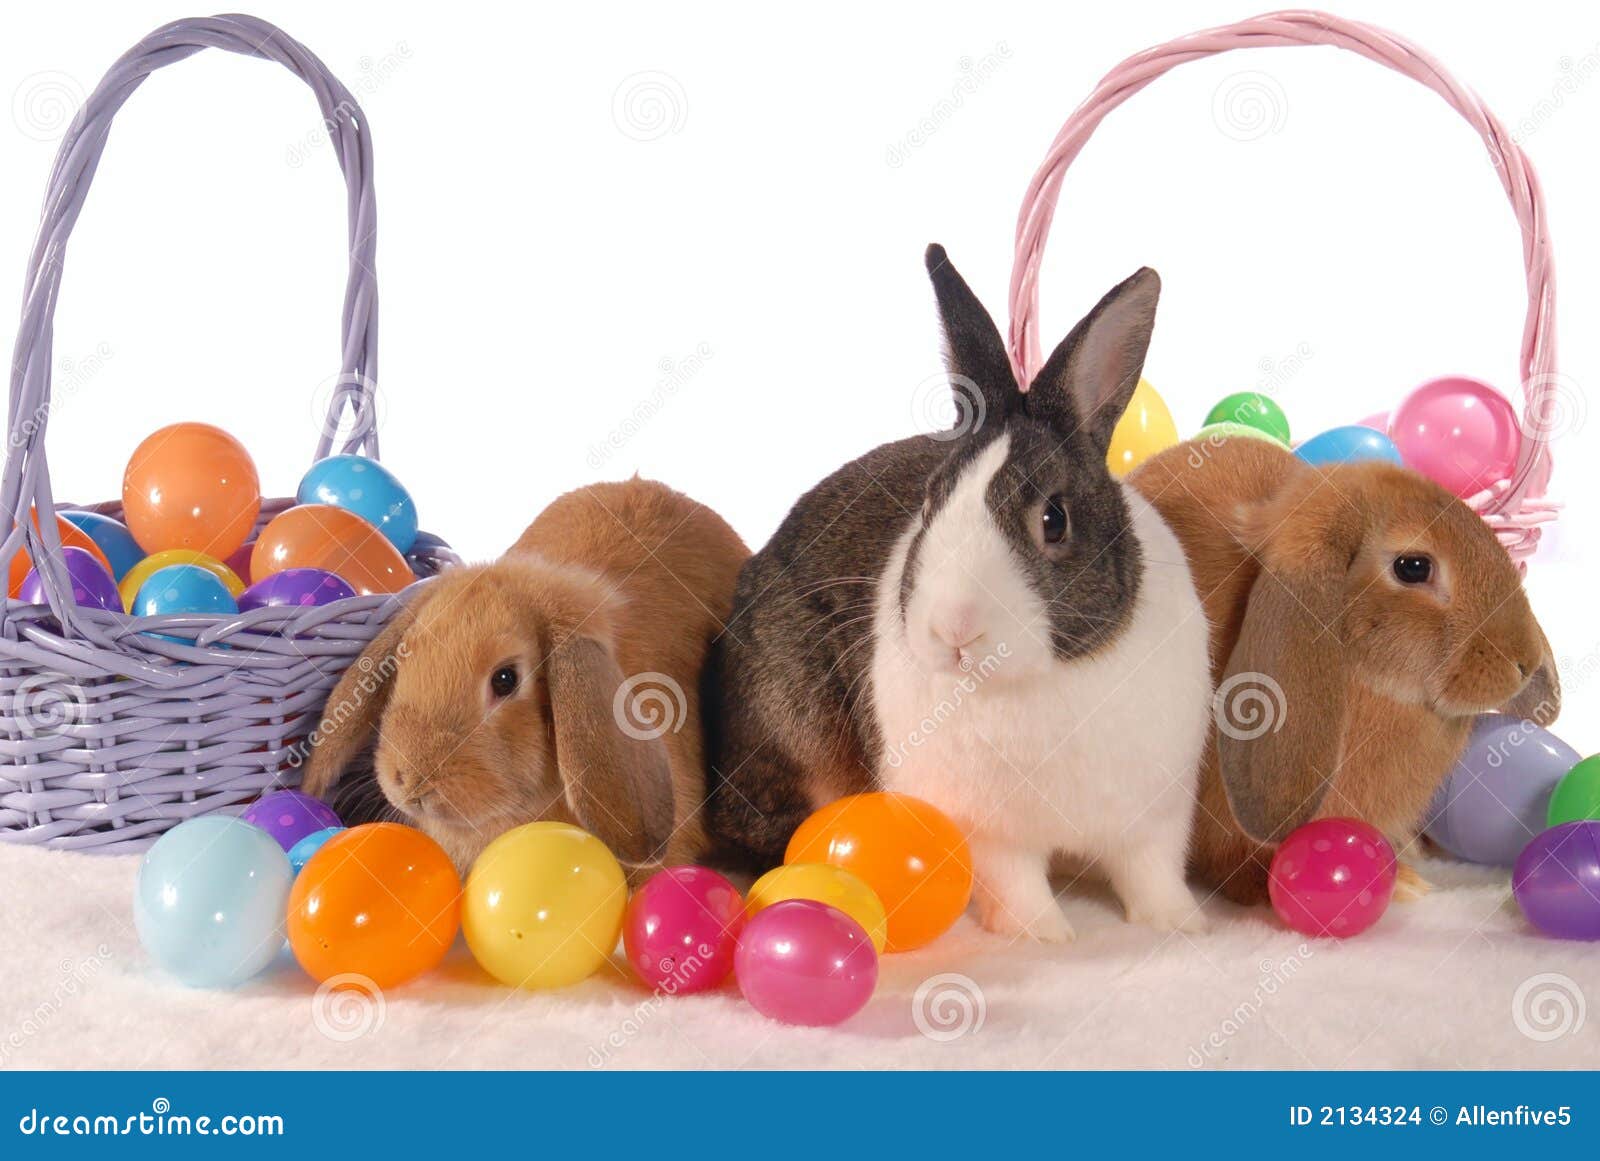 spring bunnies with eggs